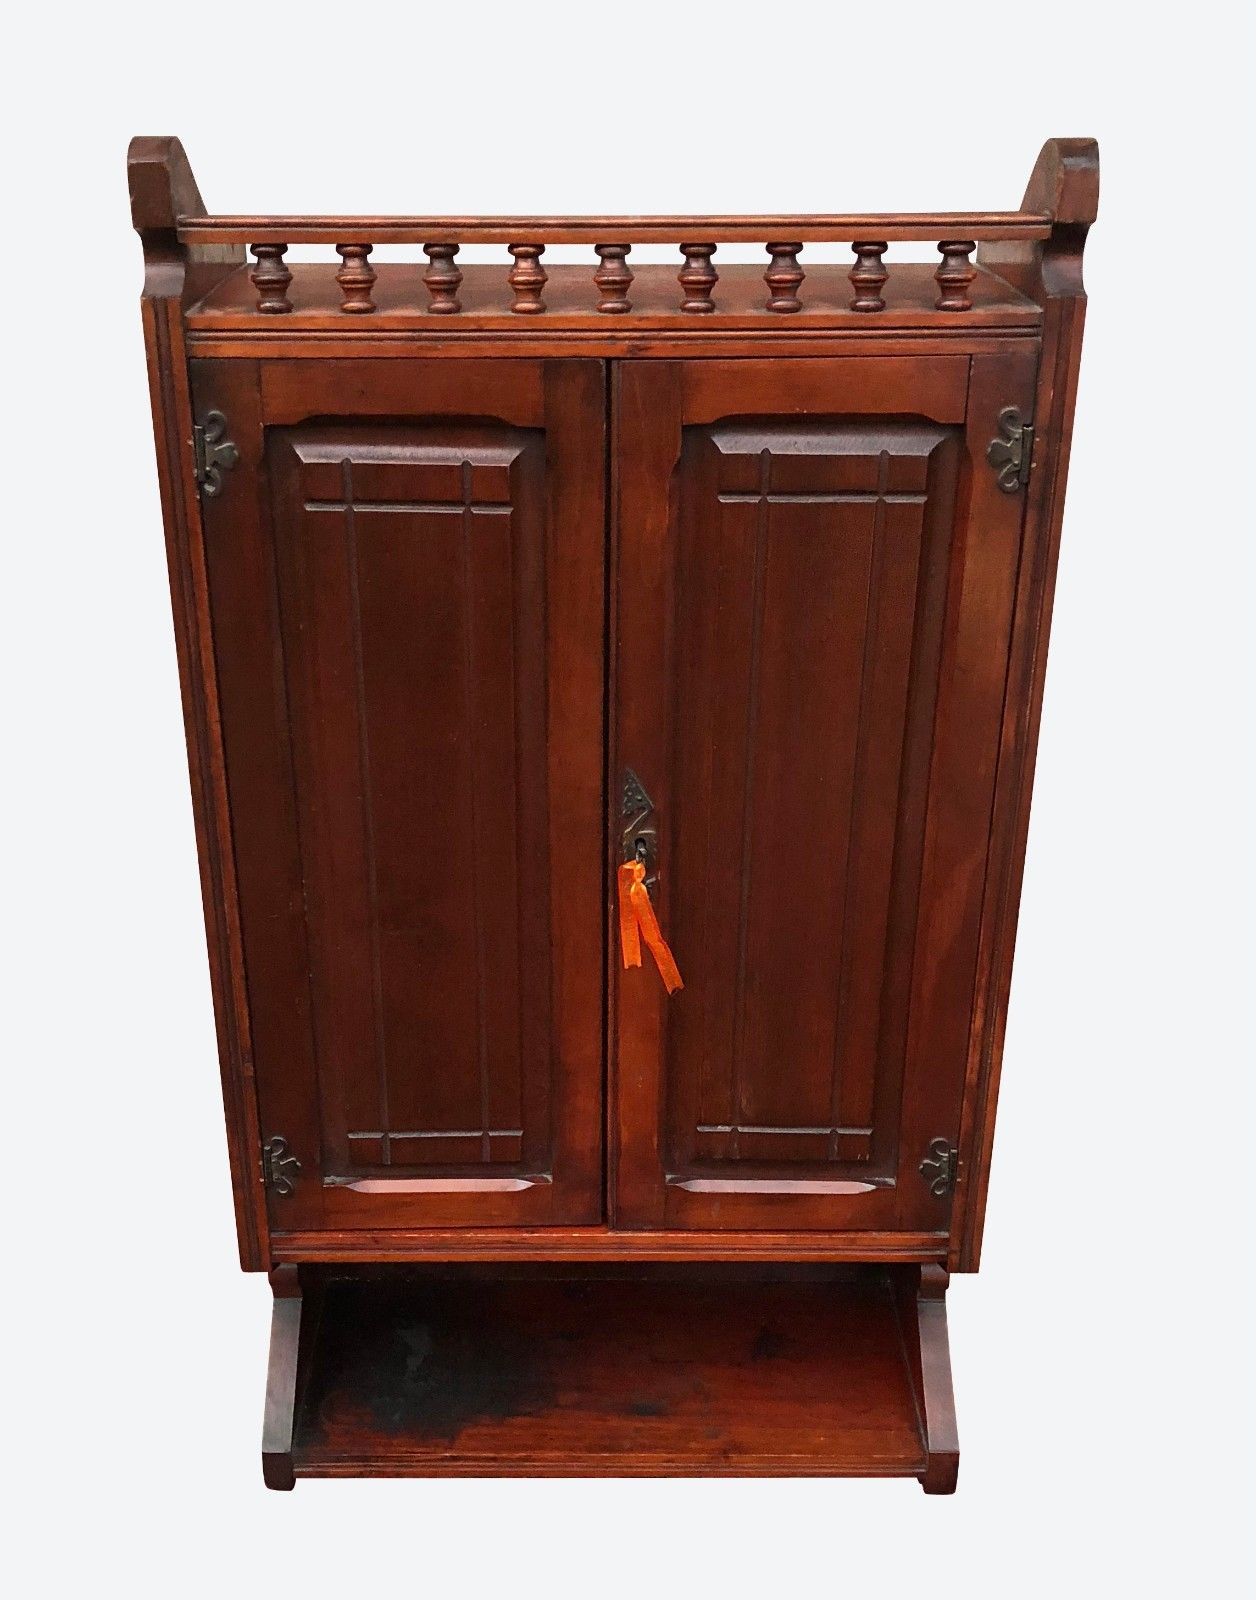 EASTLAKE VICTORIAN CHERRY STICK & BALL GALLERY RAISED PANELED WALL HUNG CABINET